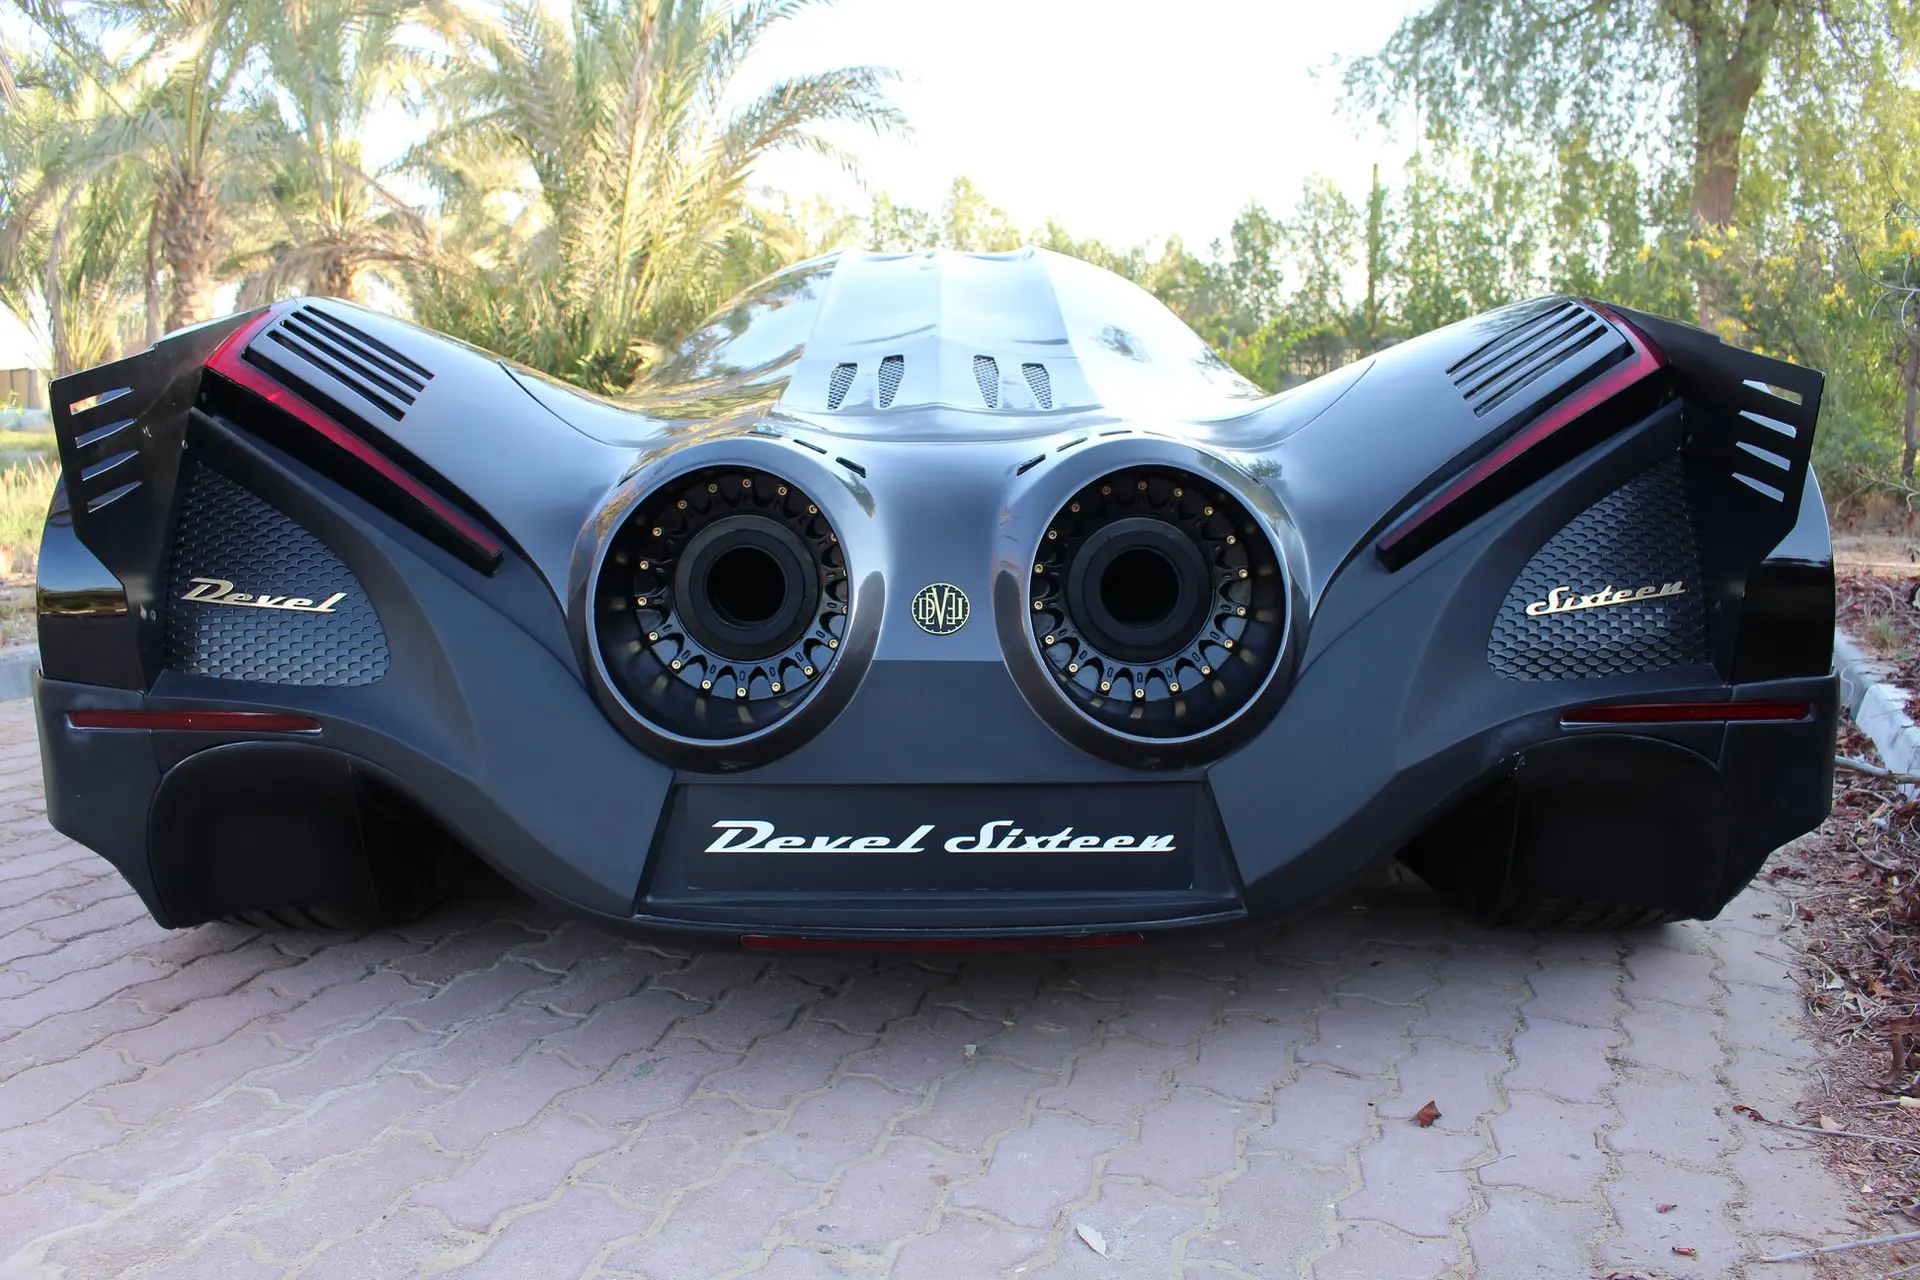 Fighter Jet-style exhausts on the Devel Sixteen